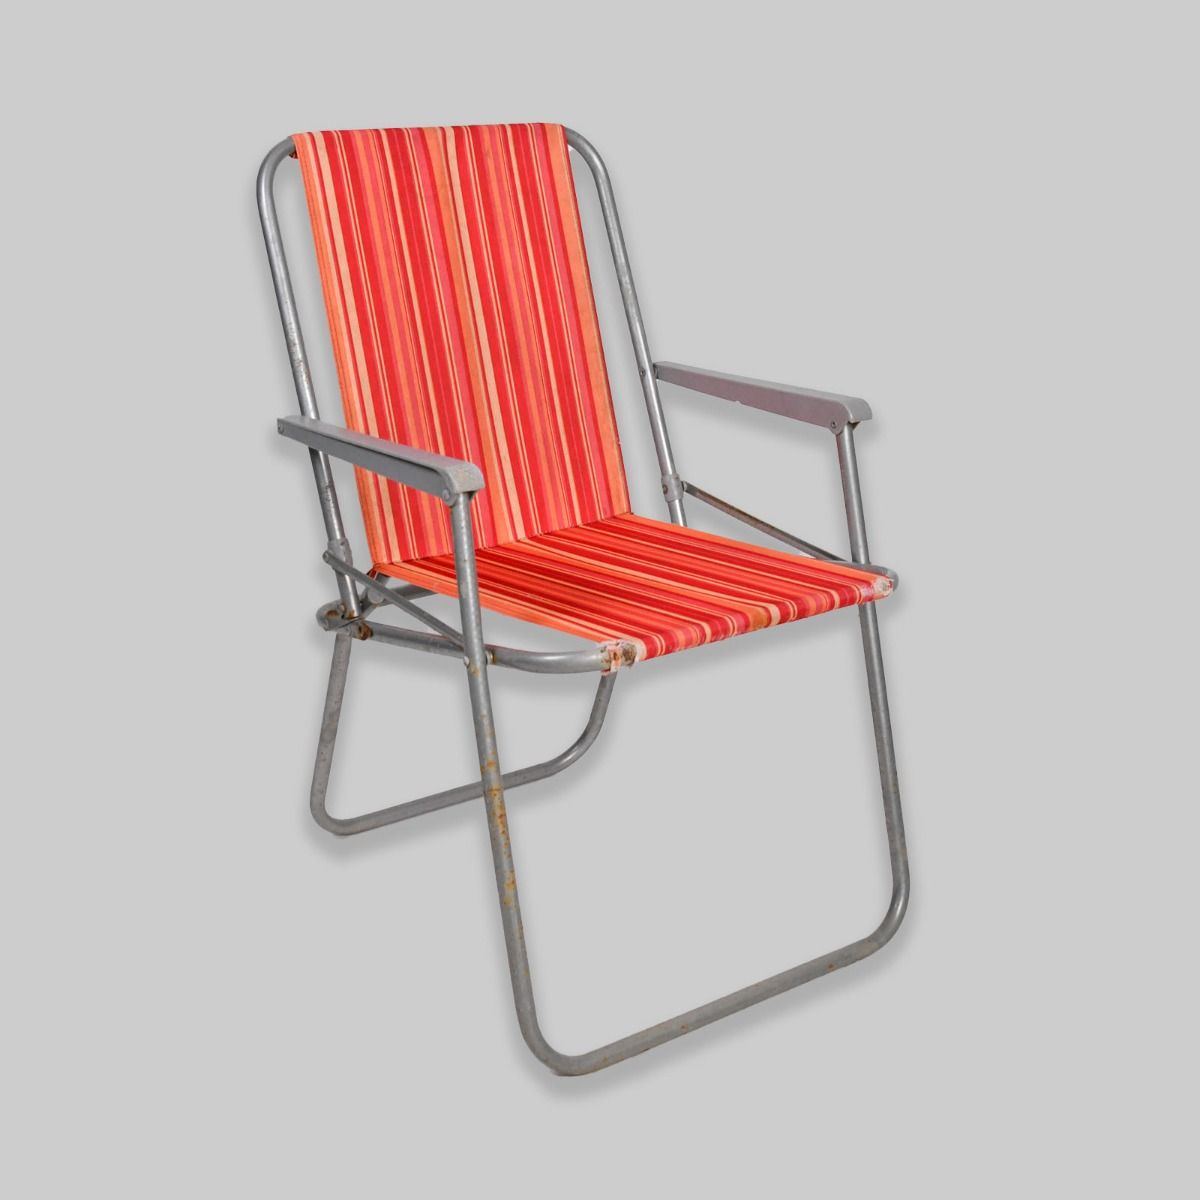 Vintage 1970s Red Striped Deck Chair